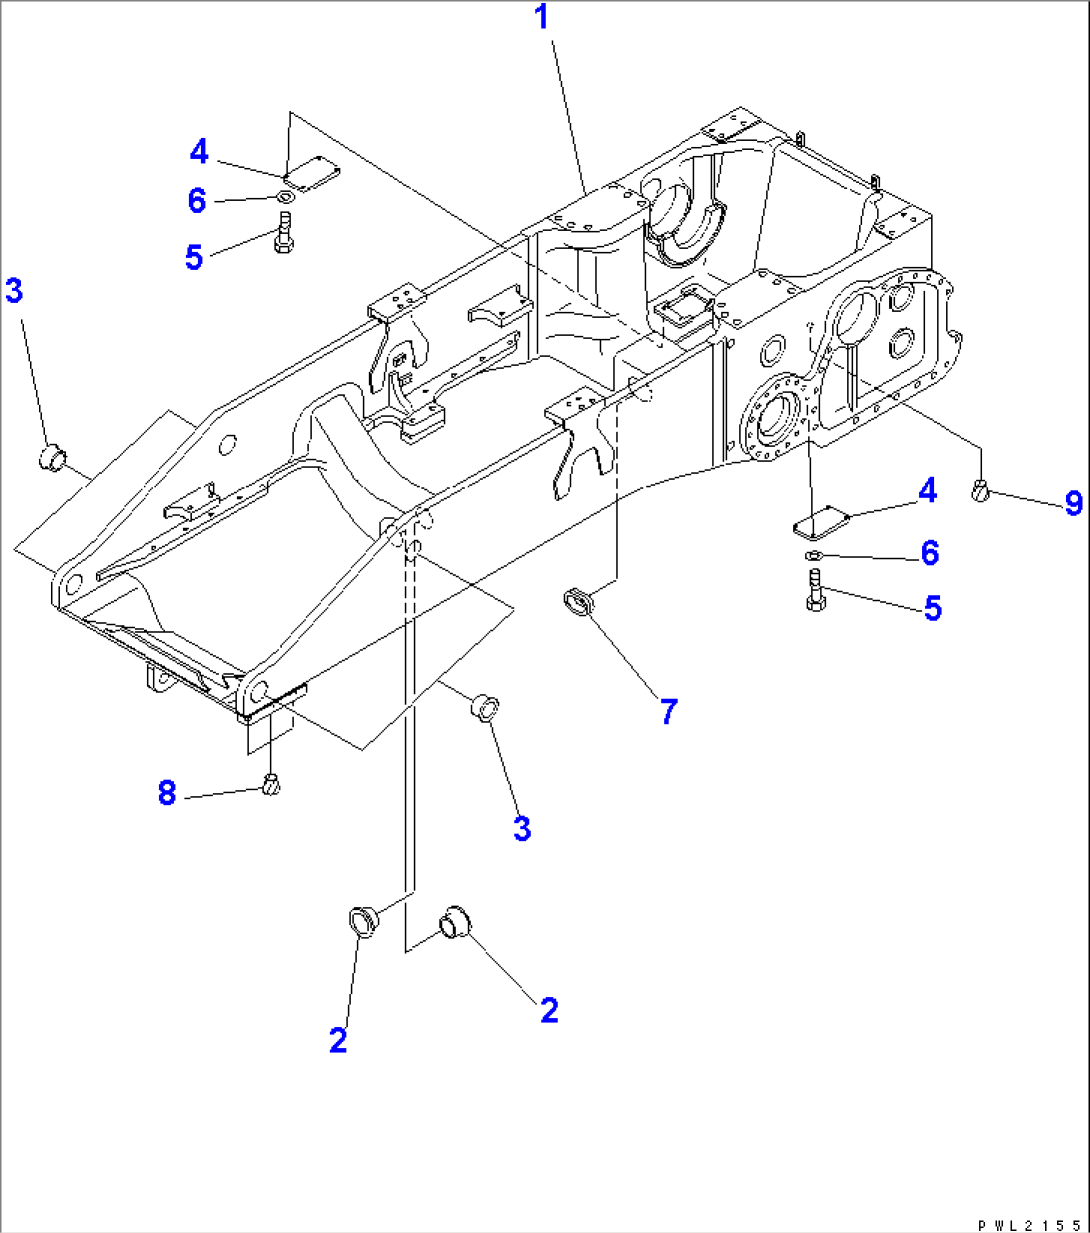 MAIN FRAME (WITHOUT FRONT CUNTER WEIGHT)(#75001-)